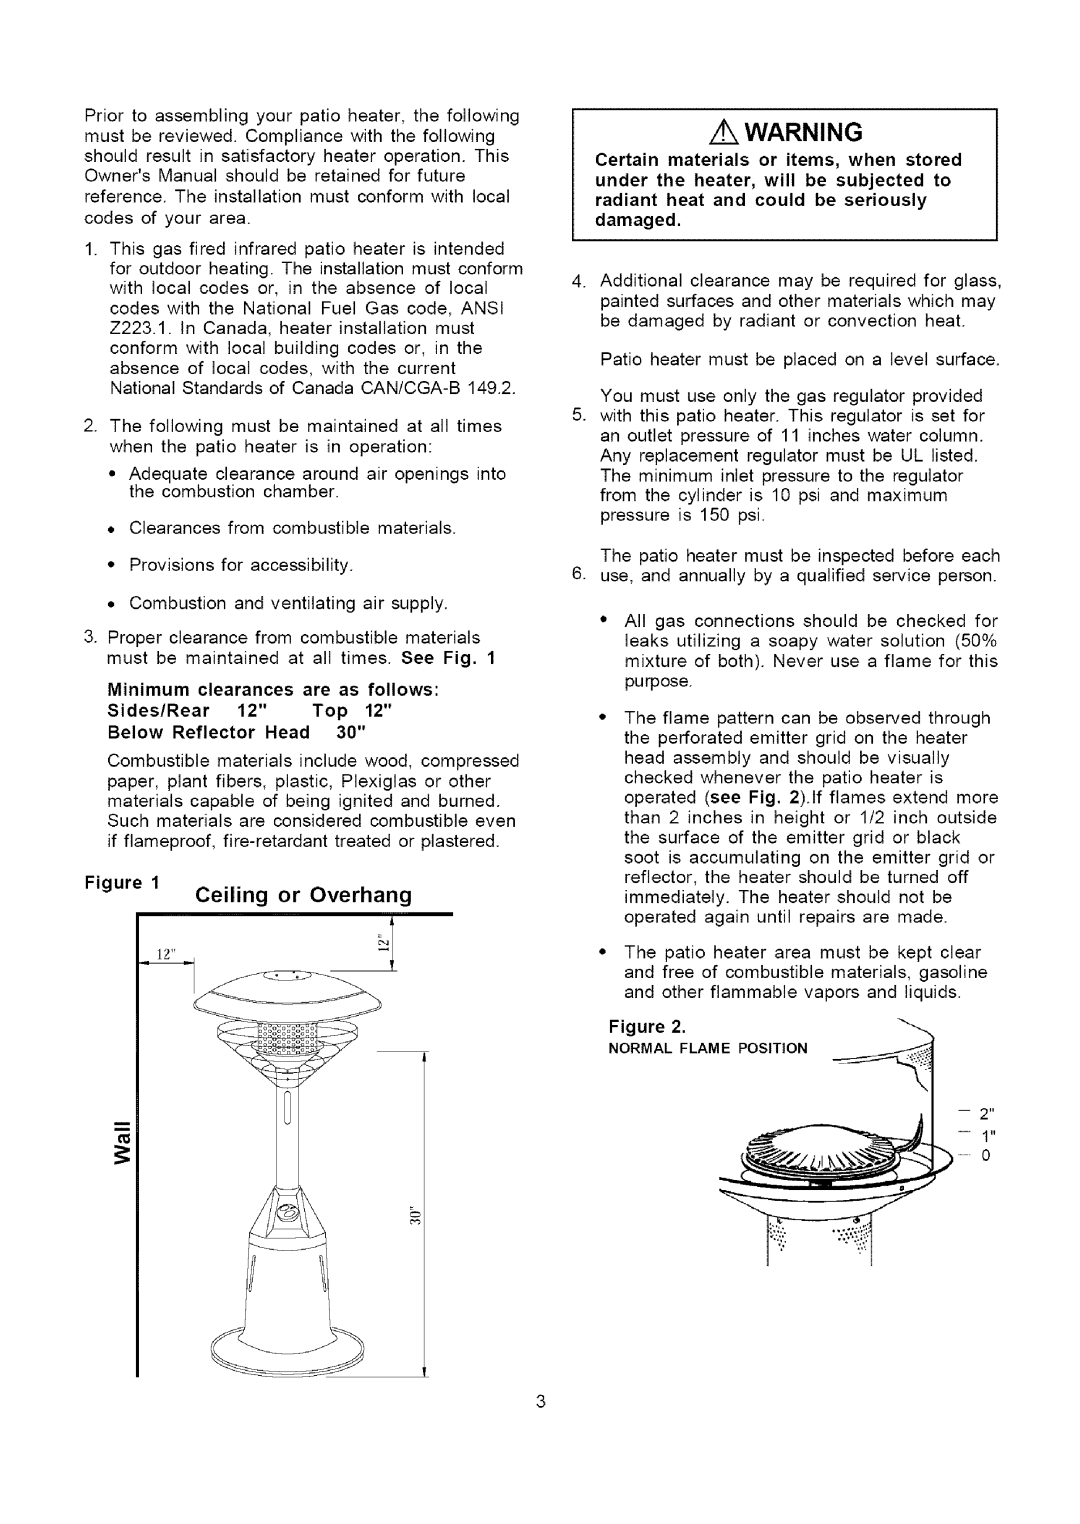 Grand Hall 22899 owner manual Clearancesfromcombustiblematerials 